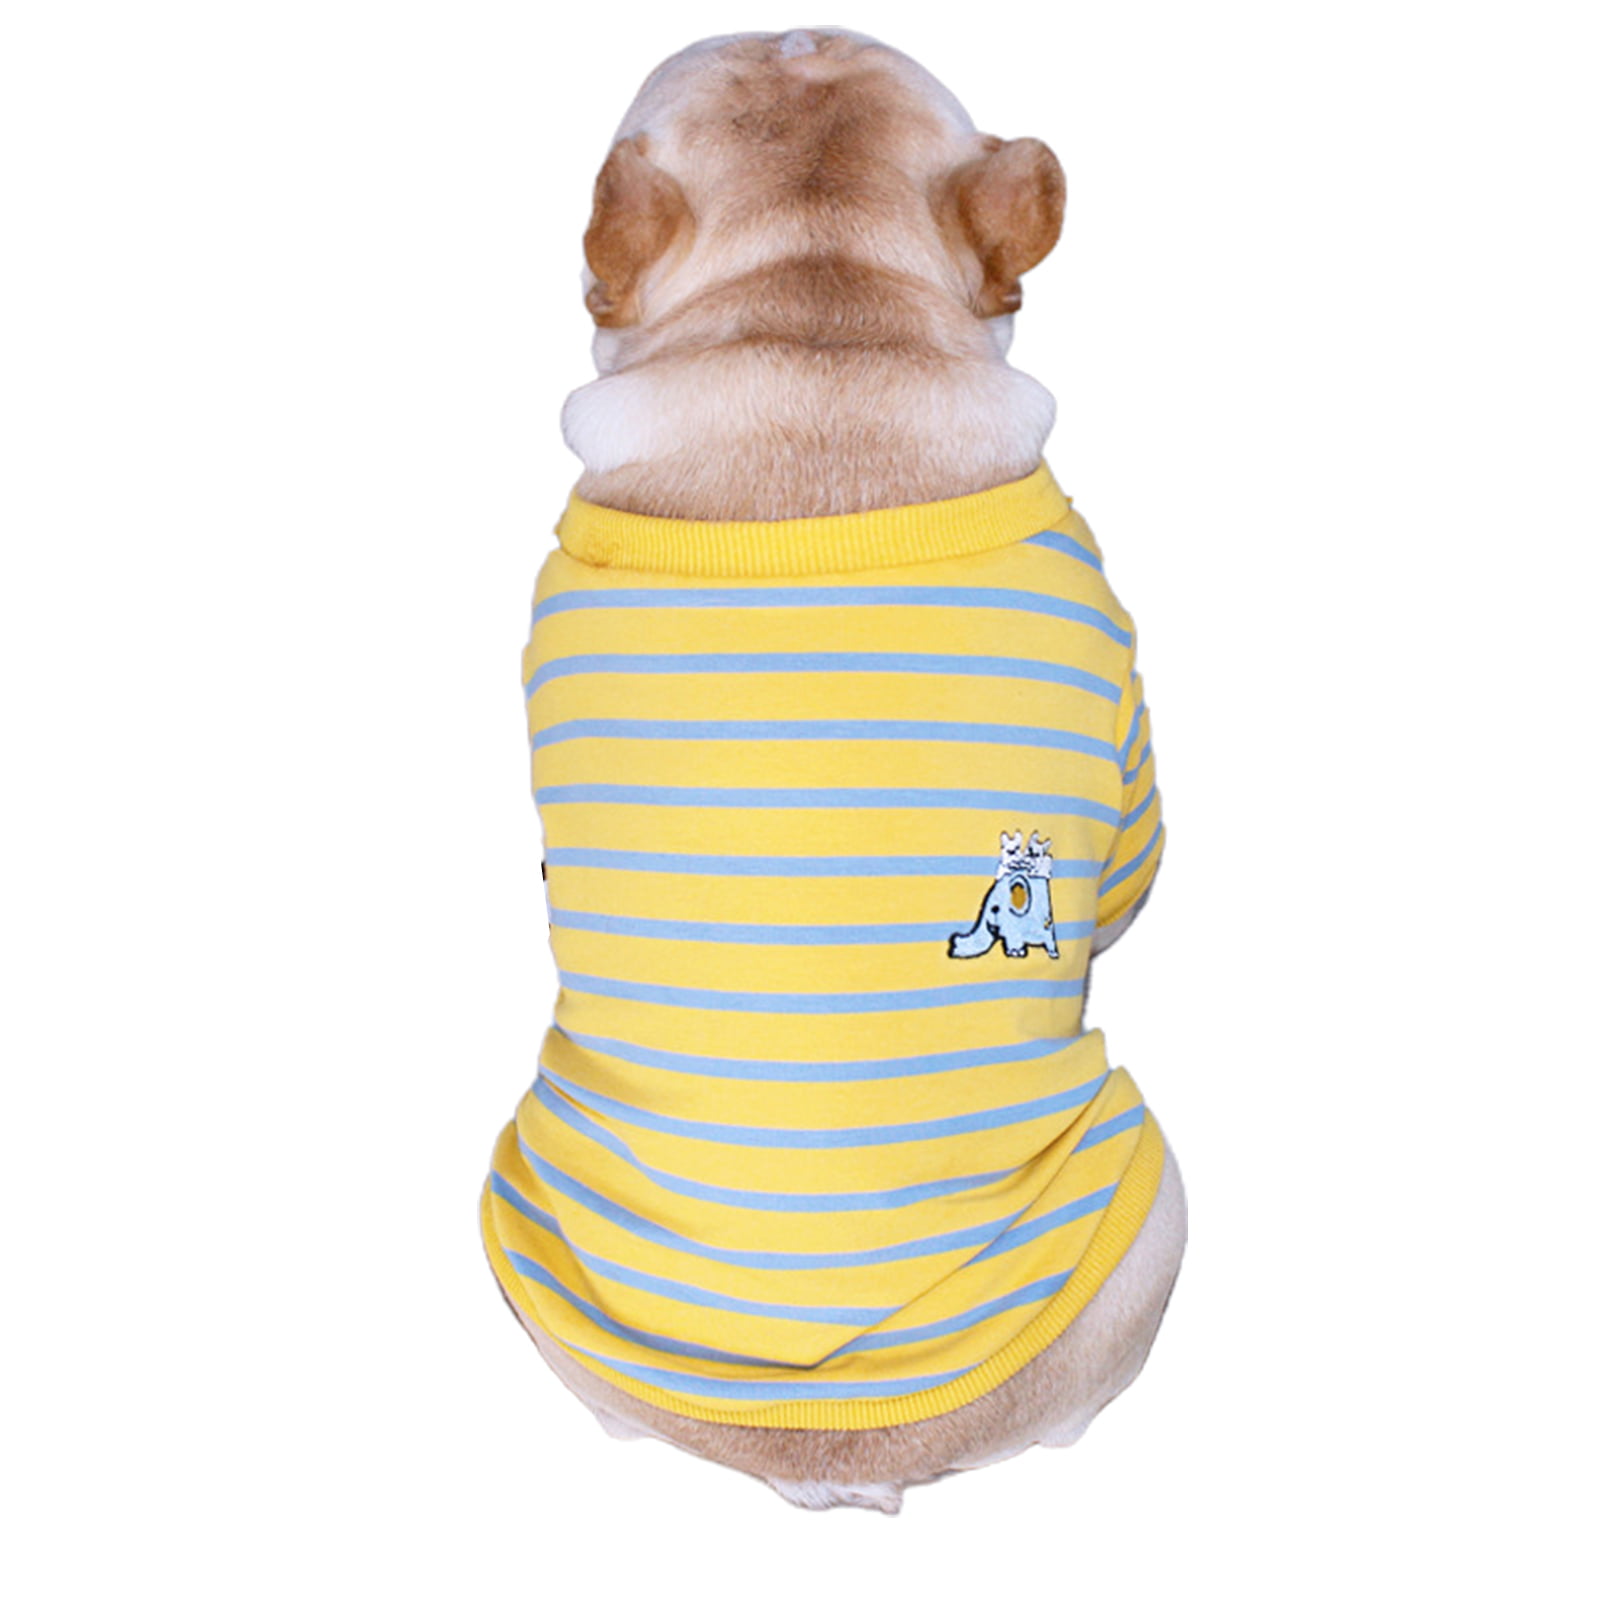 Pet Dog Puppy Cotton Stripe Cute Yellow Duck Stretch Sweater T-shirt Clothes 